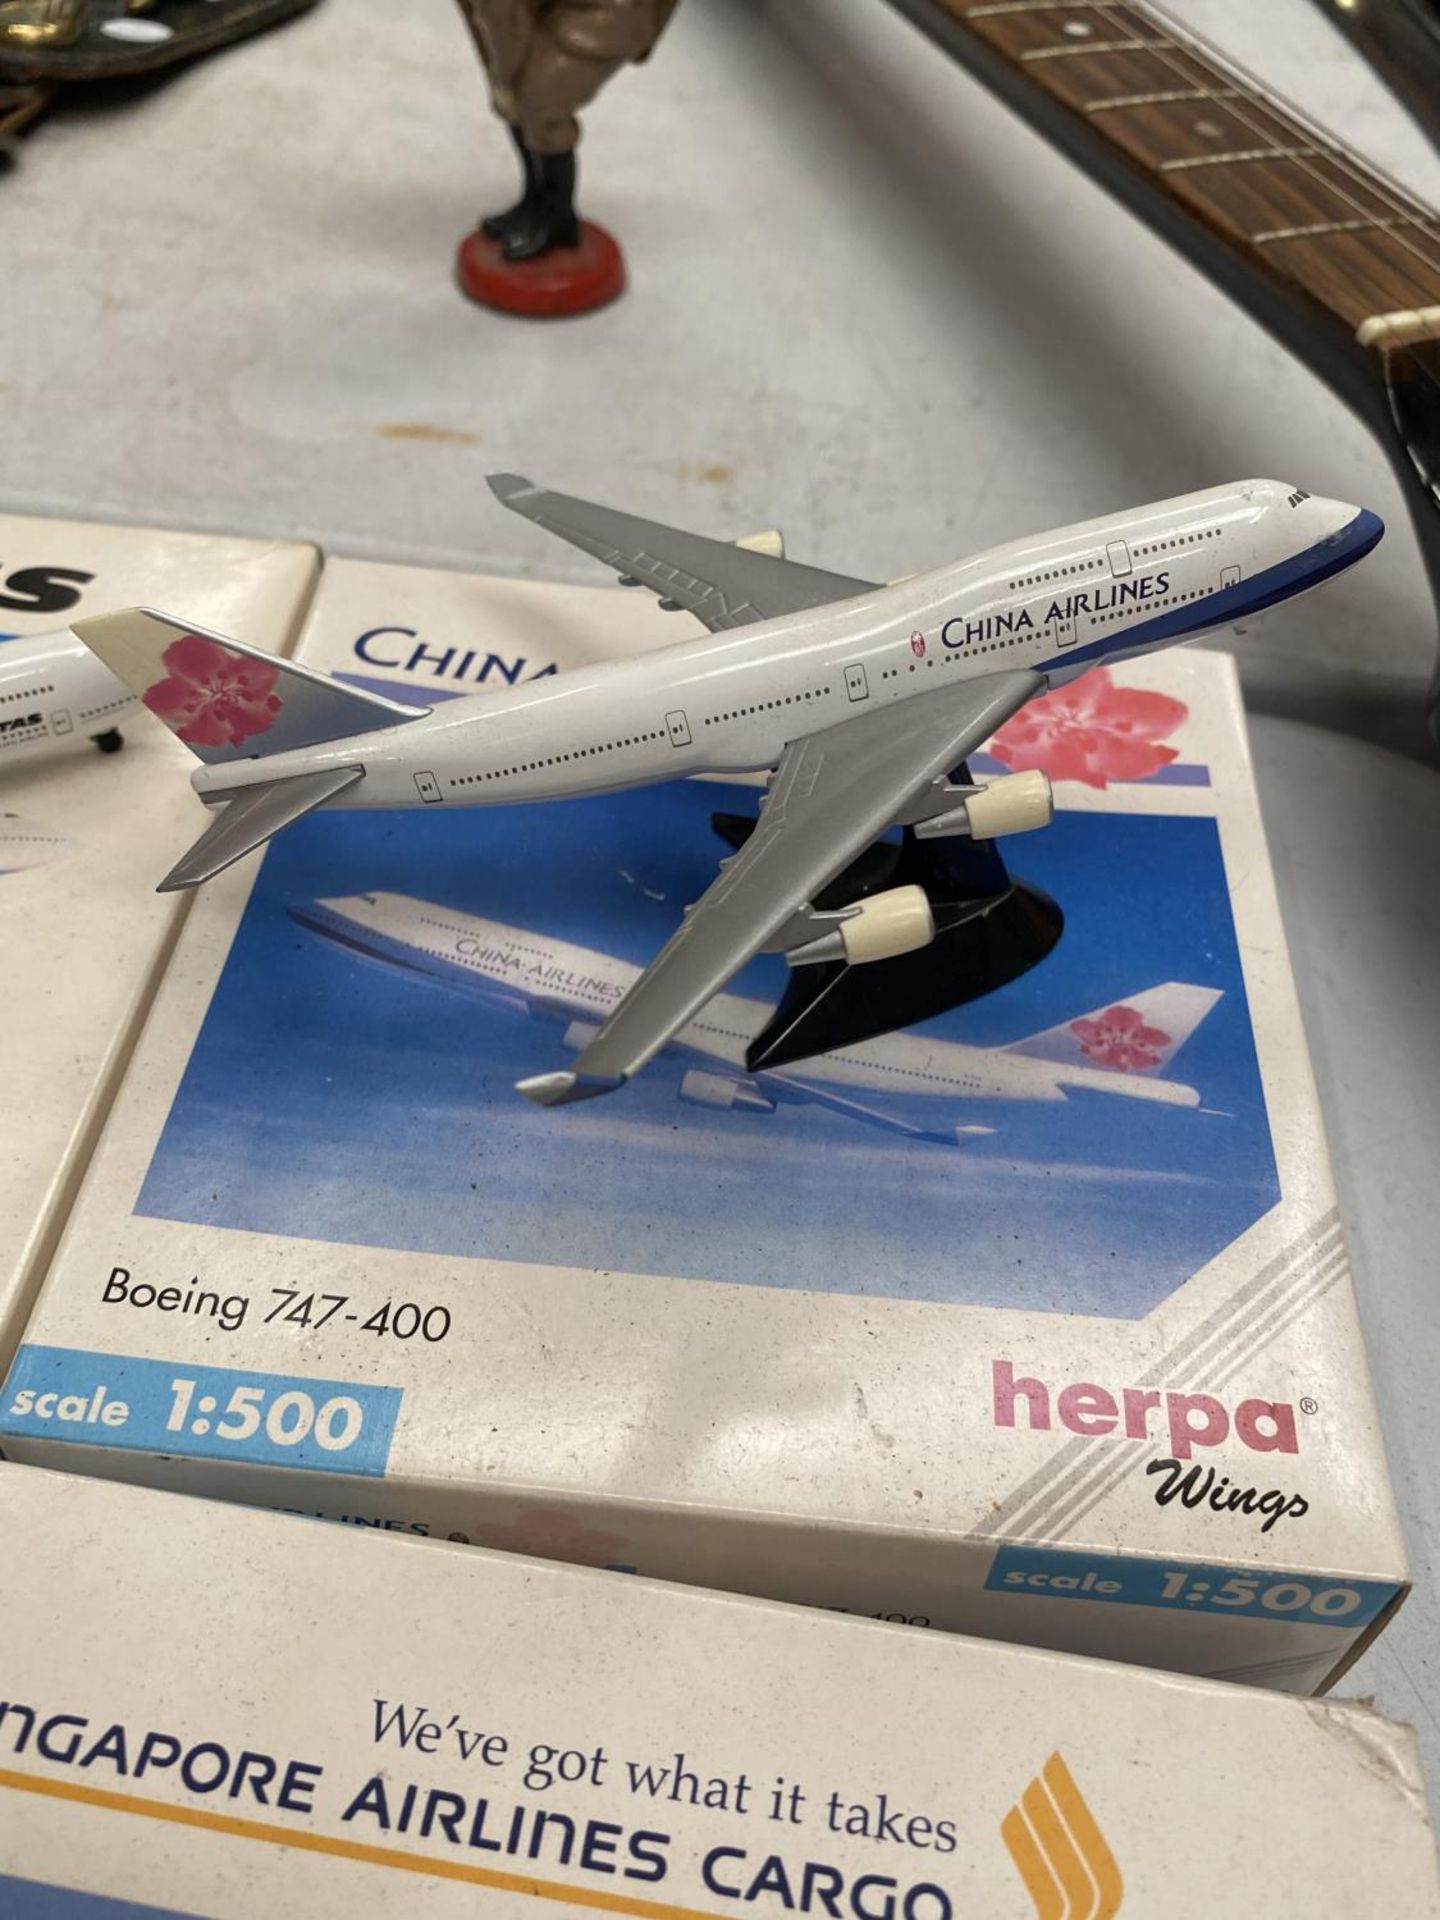 A COLLECTION OF MODEL AIRCRAFT MODELS - Image 2 of 4